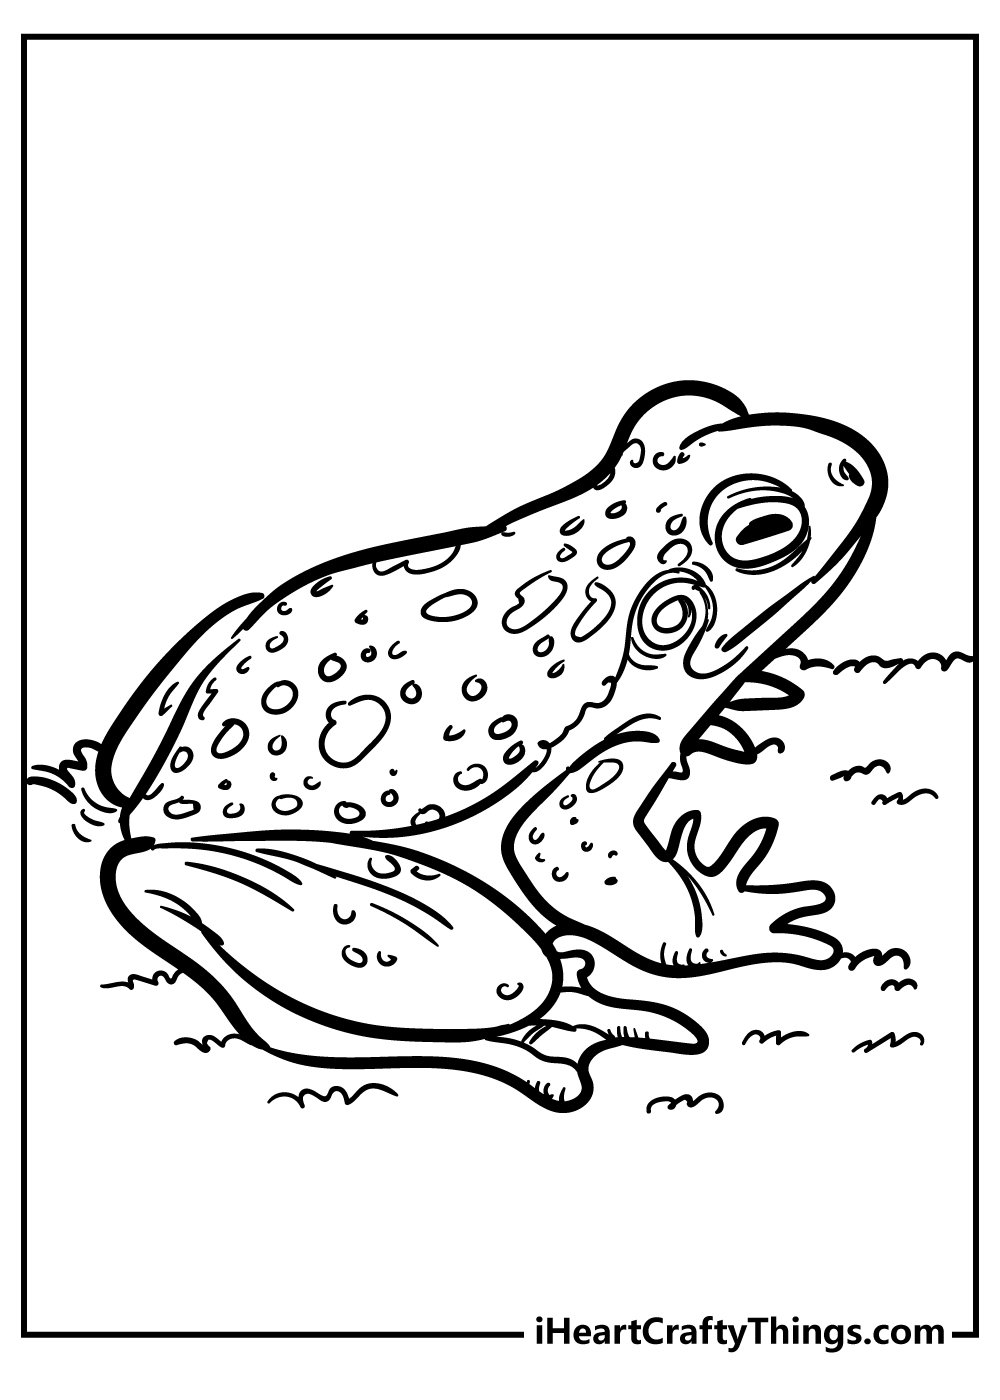 Toad coloring pages free printables